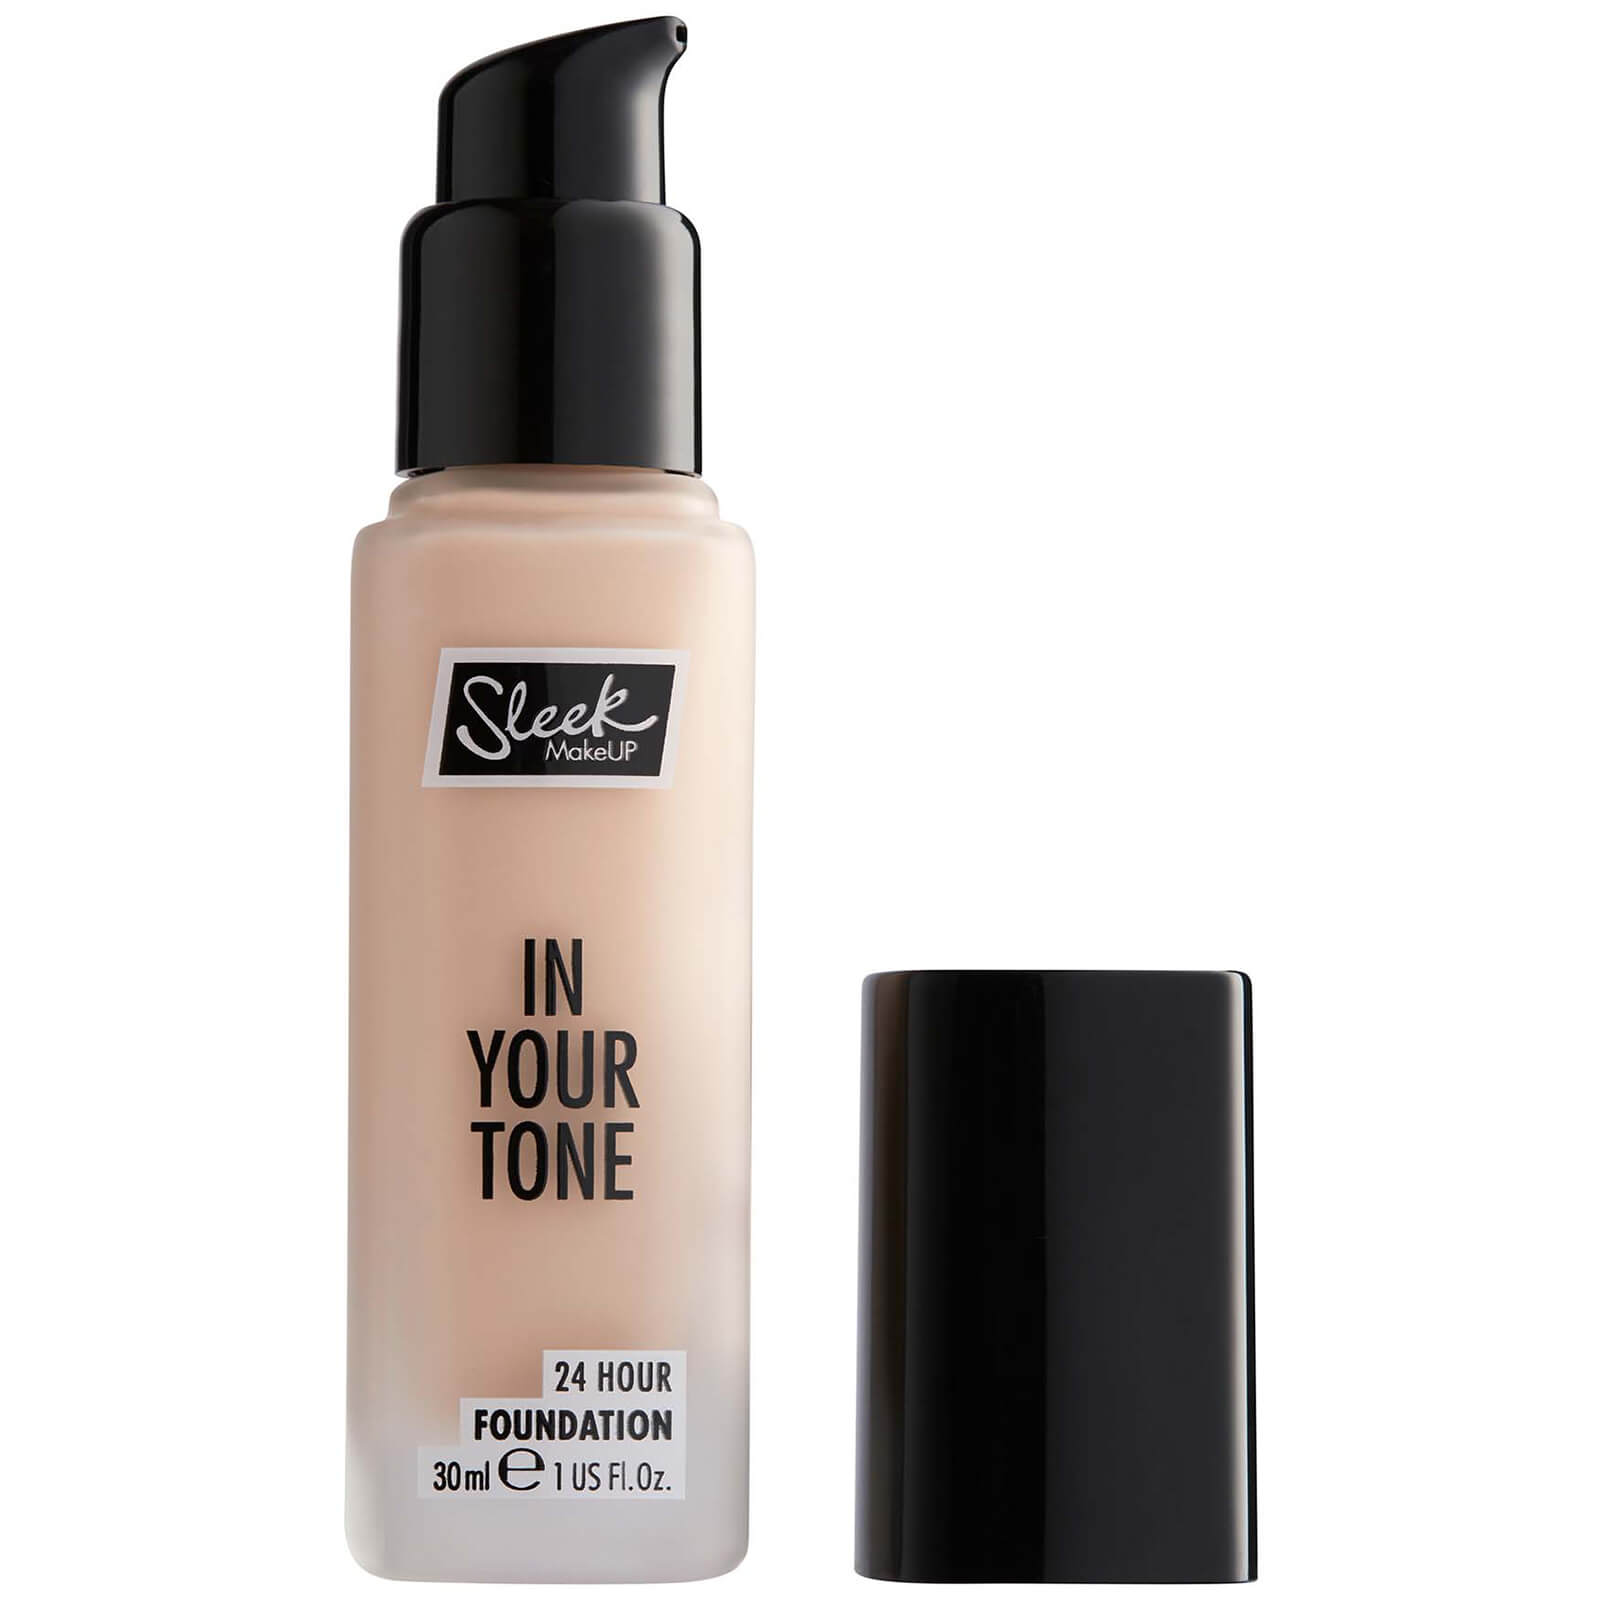 Sleek MakeUP in Your Tone 24 Hour Foundation 30ml (Various Shades) - 2C